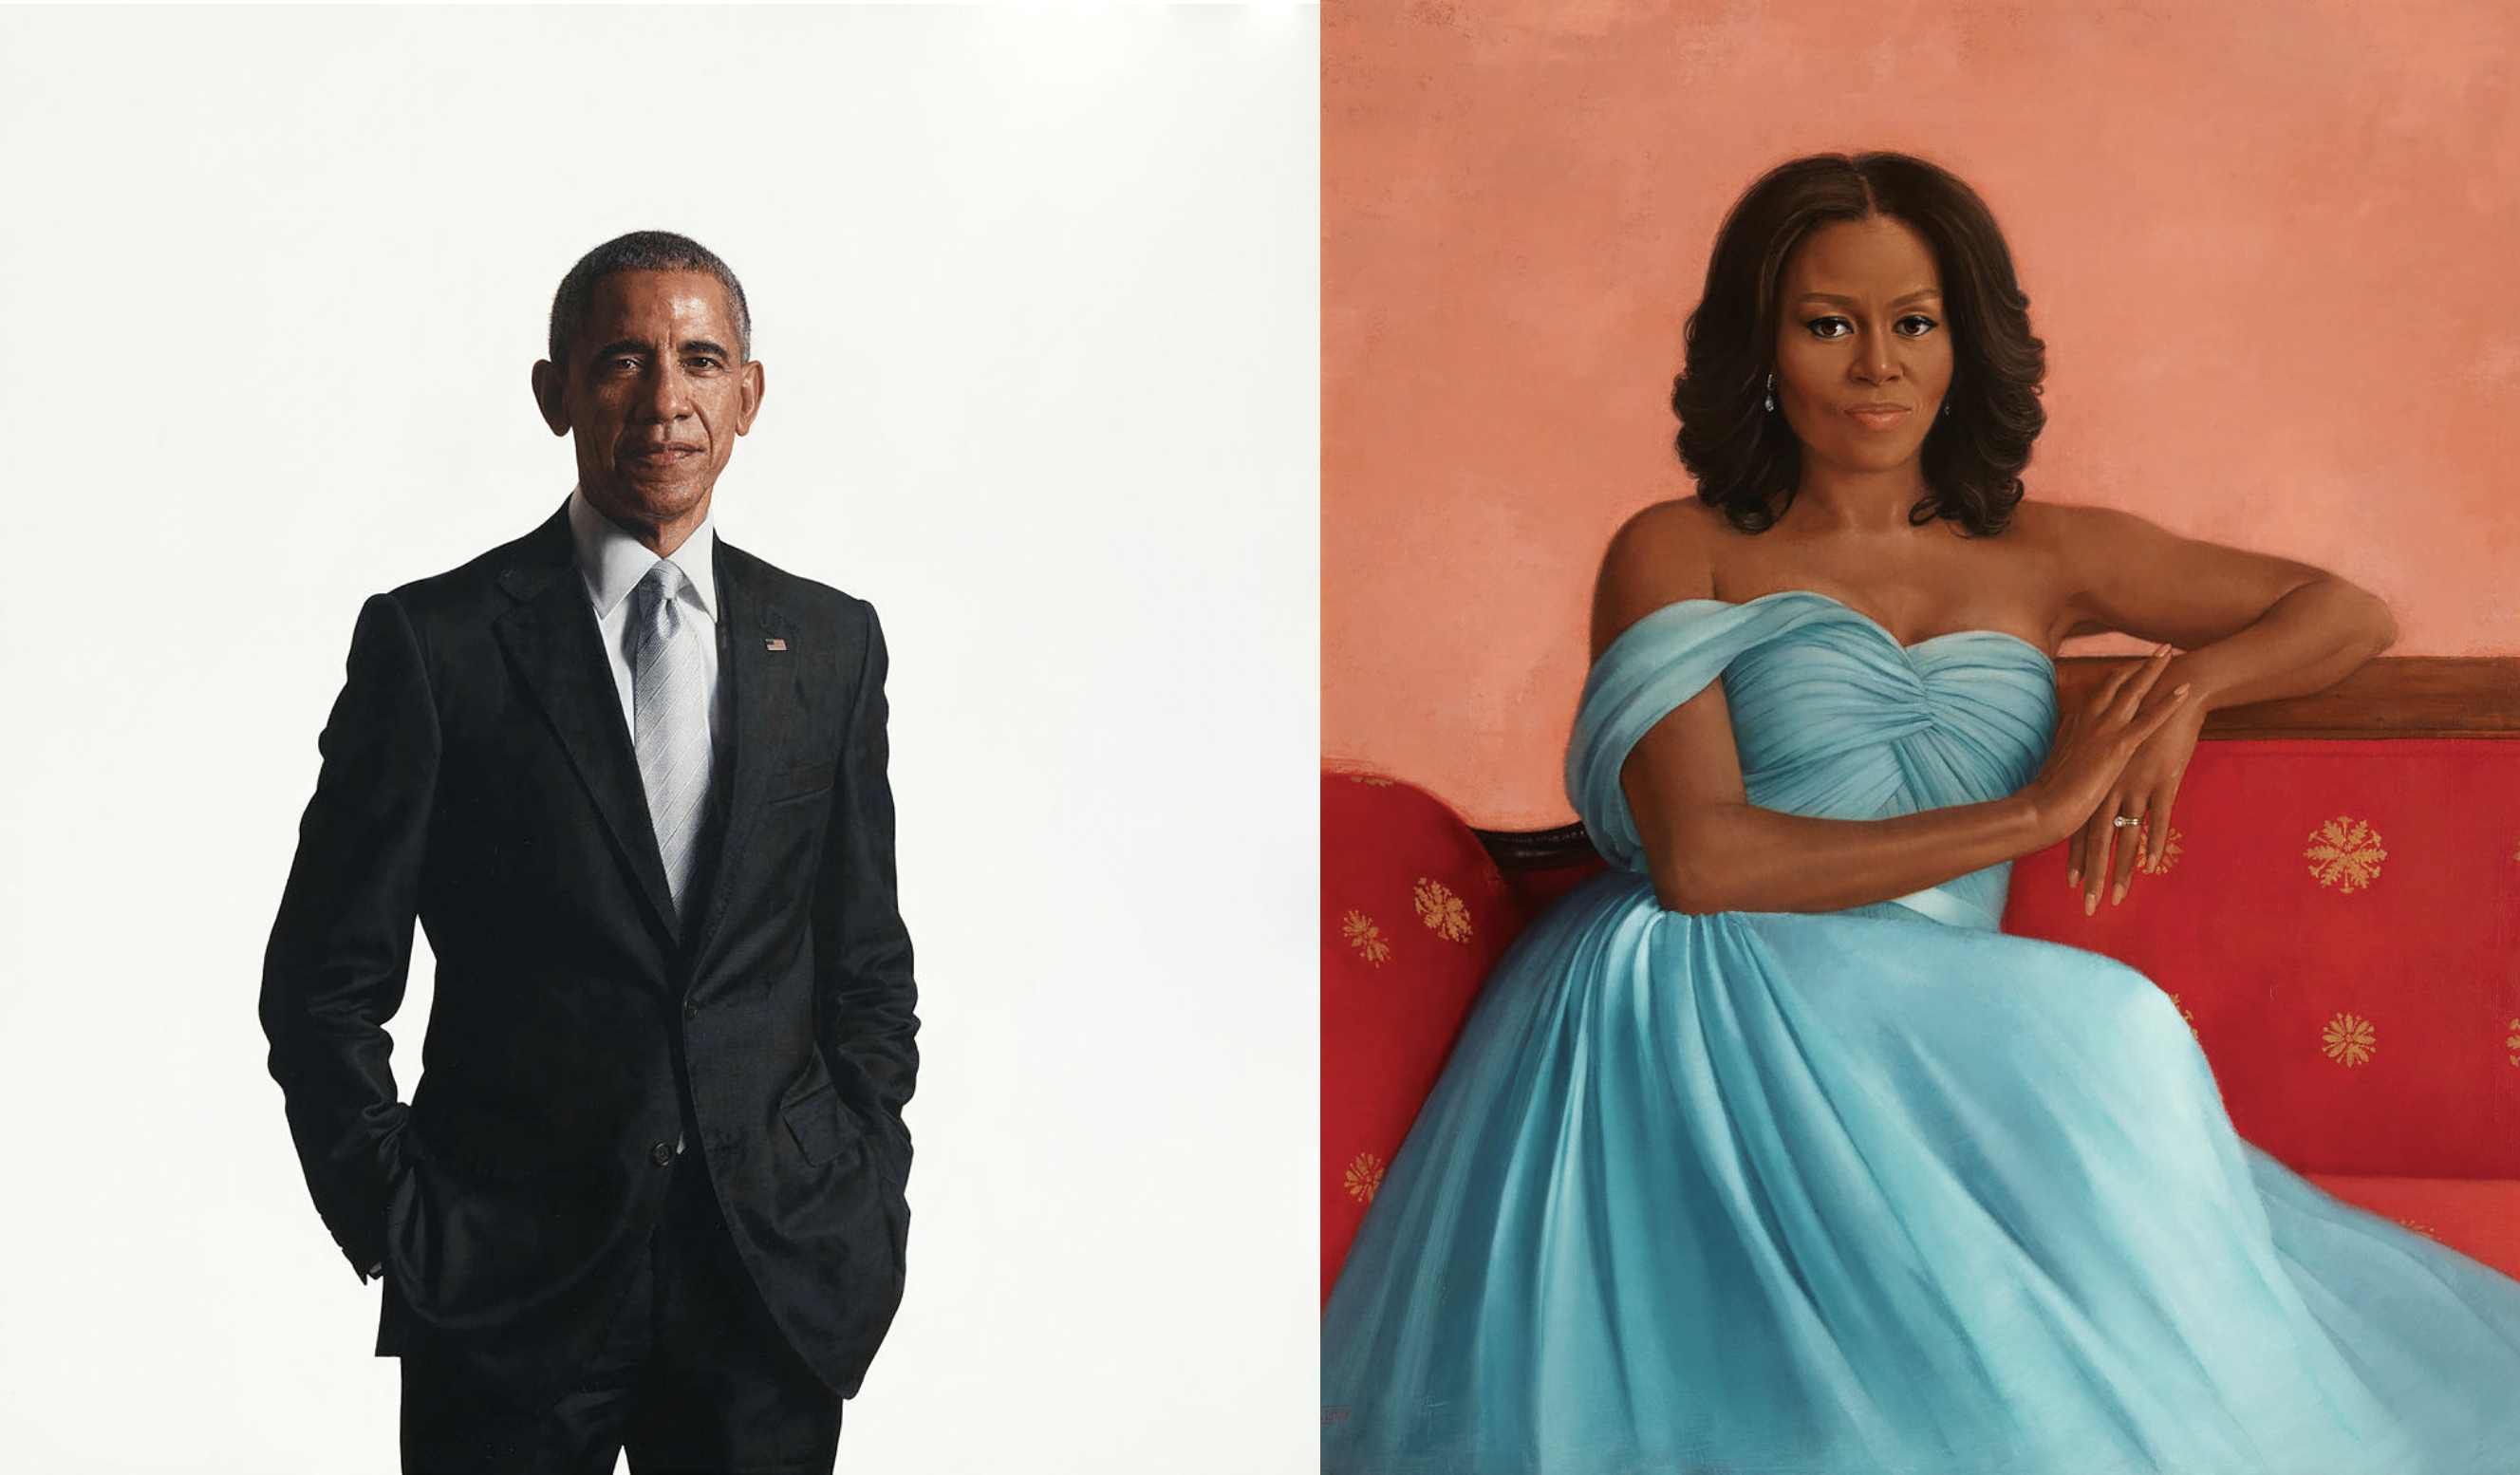 The official White House portraits of former President Barack Obama and former first lady Michelle Obama were unveiled on September 7. Barack Obama’s portrait was painted by Robert McCurdy, and Michelle Obama’s portrait was painted by Sharon Sprung. Images courtesy of the White House Historical Association / White House Collection